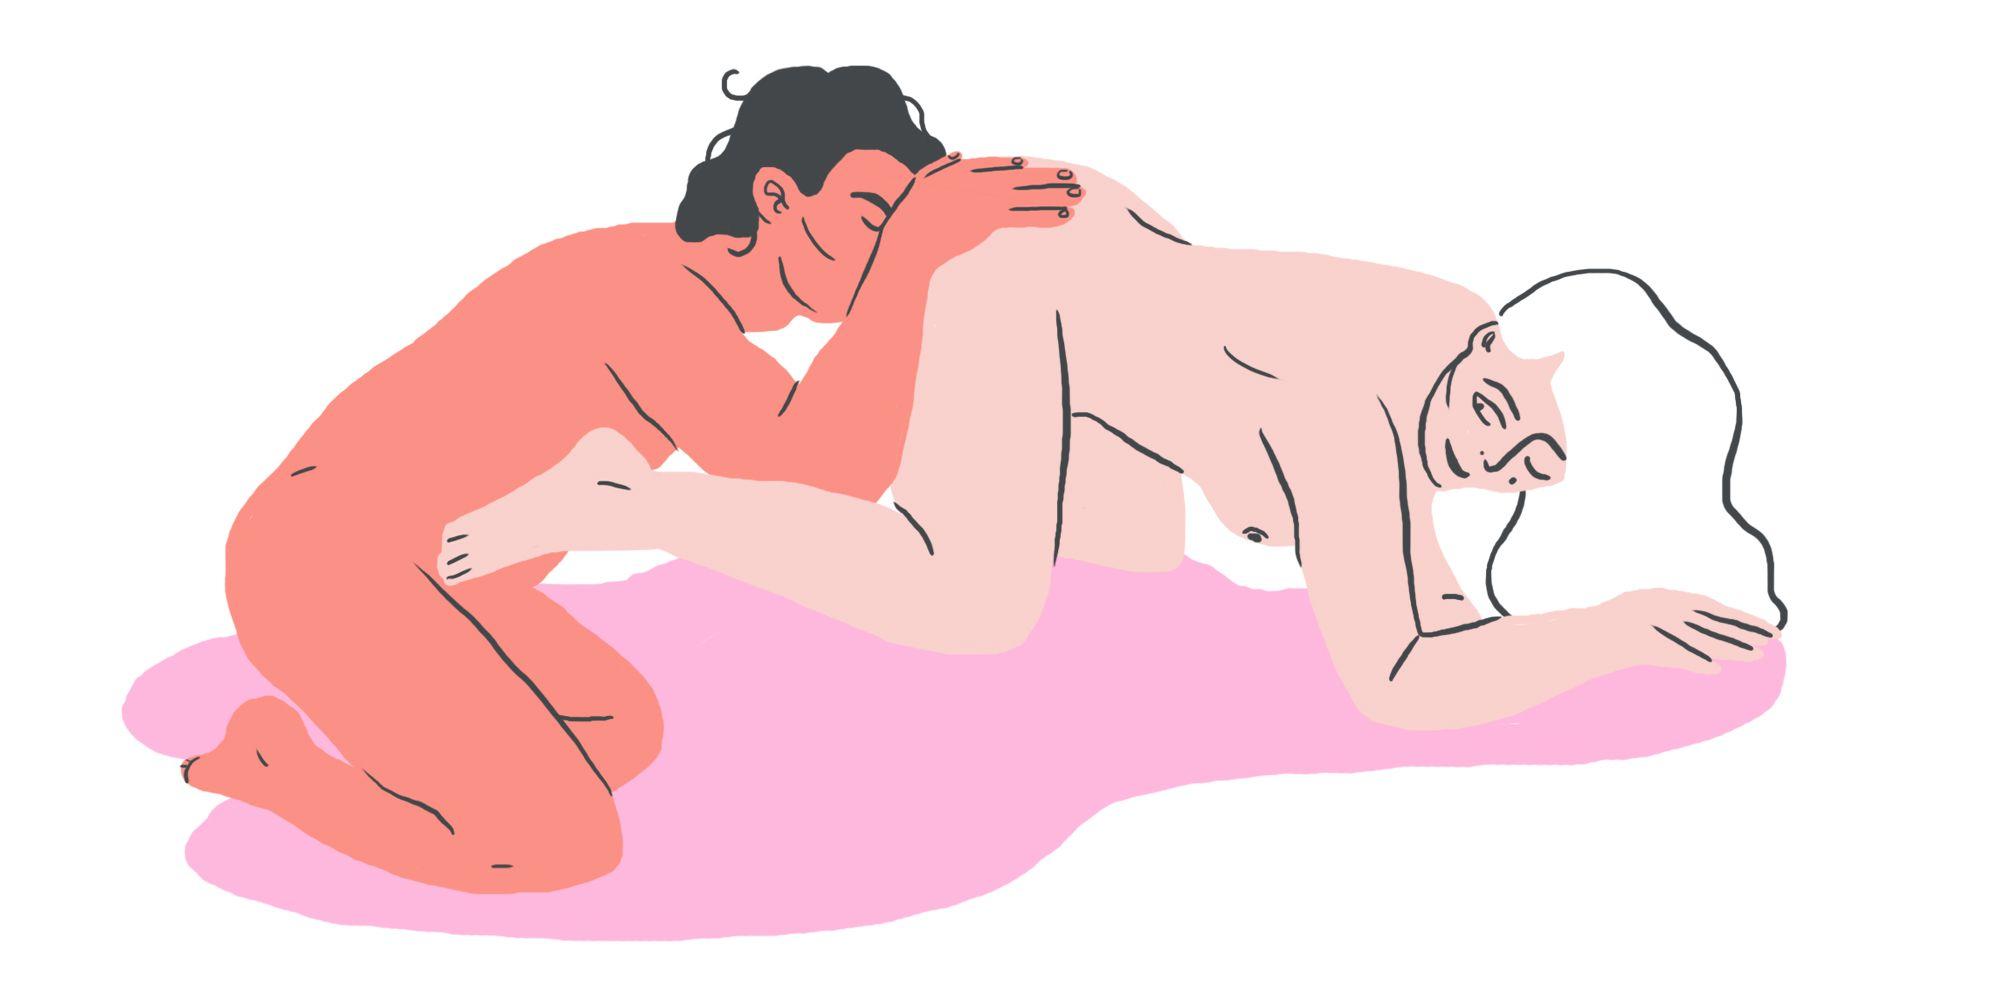 Slideshow: sex positions to eat pussy.